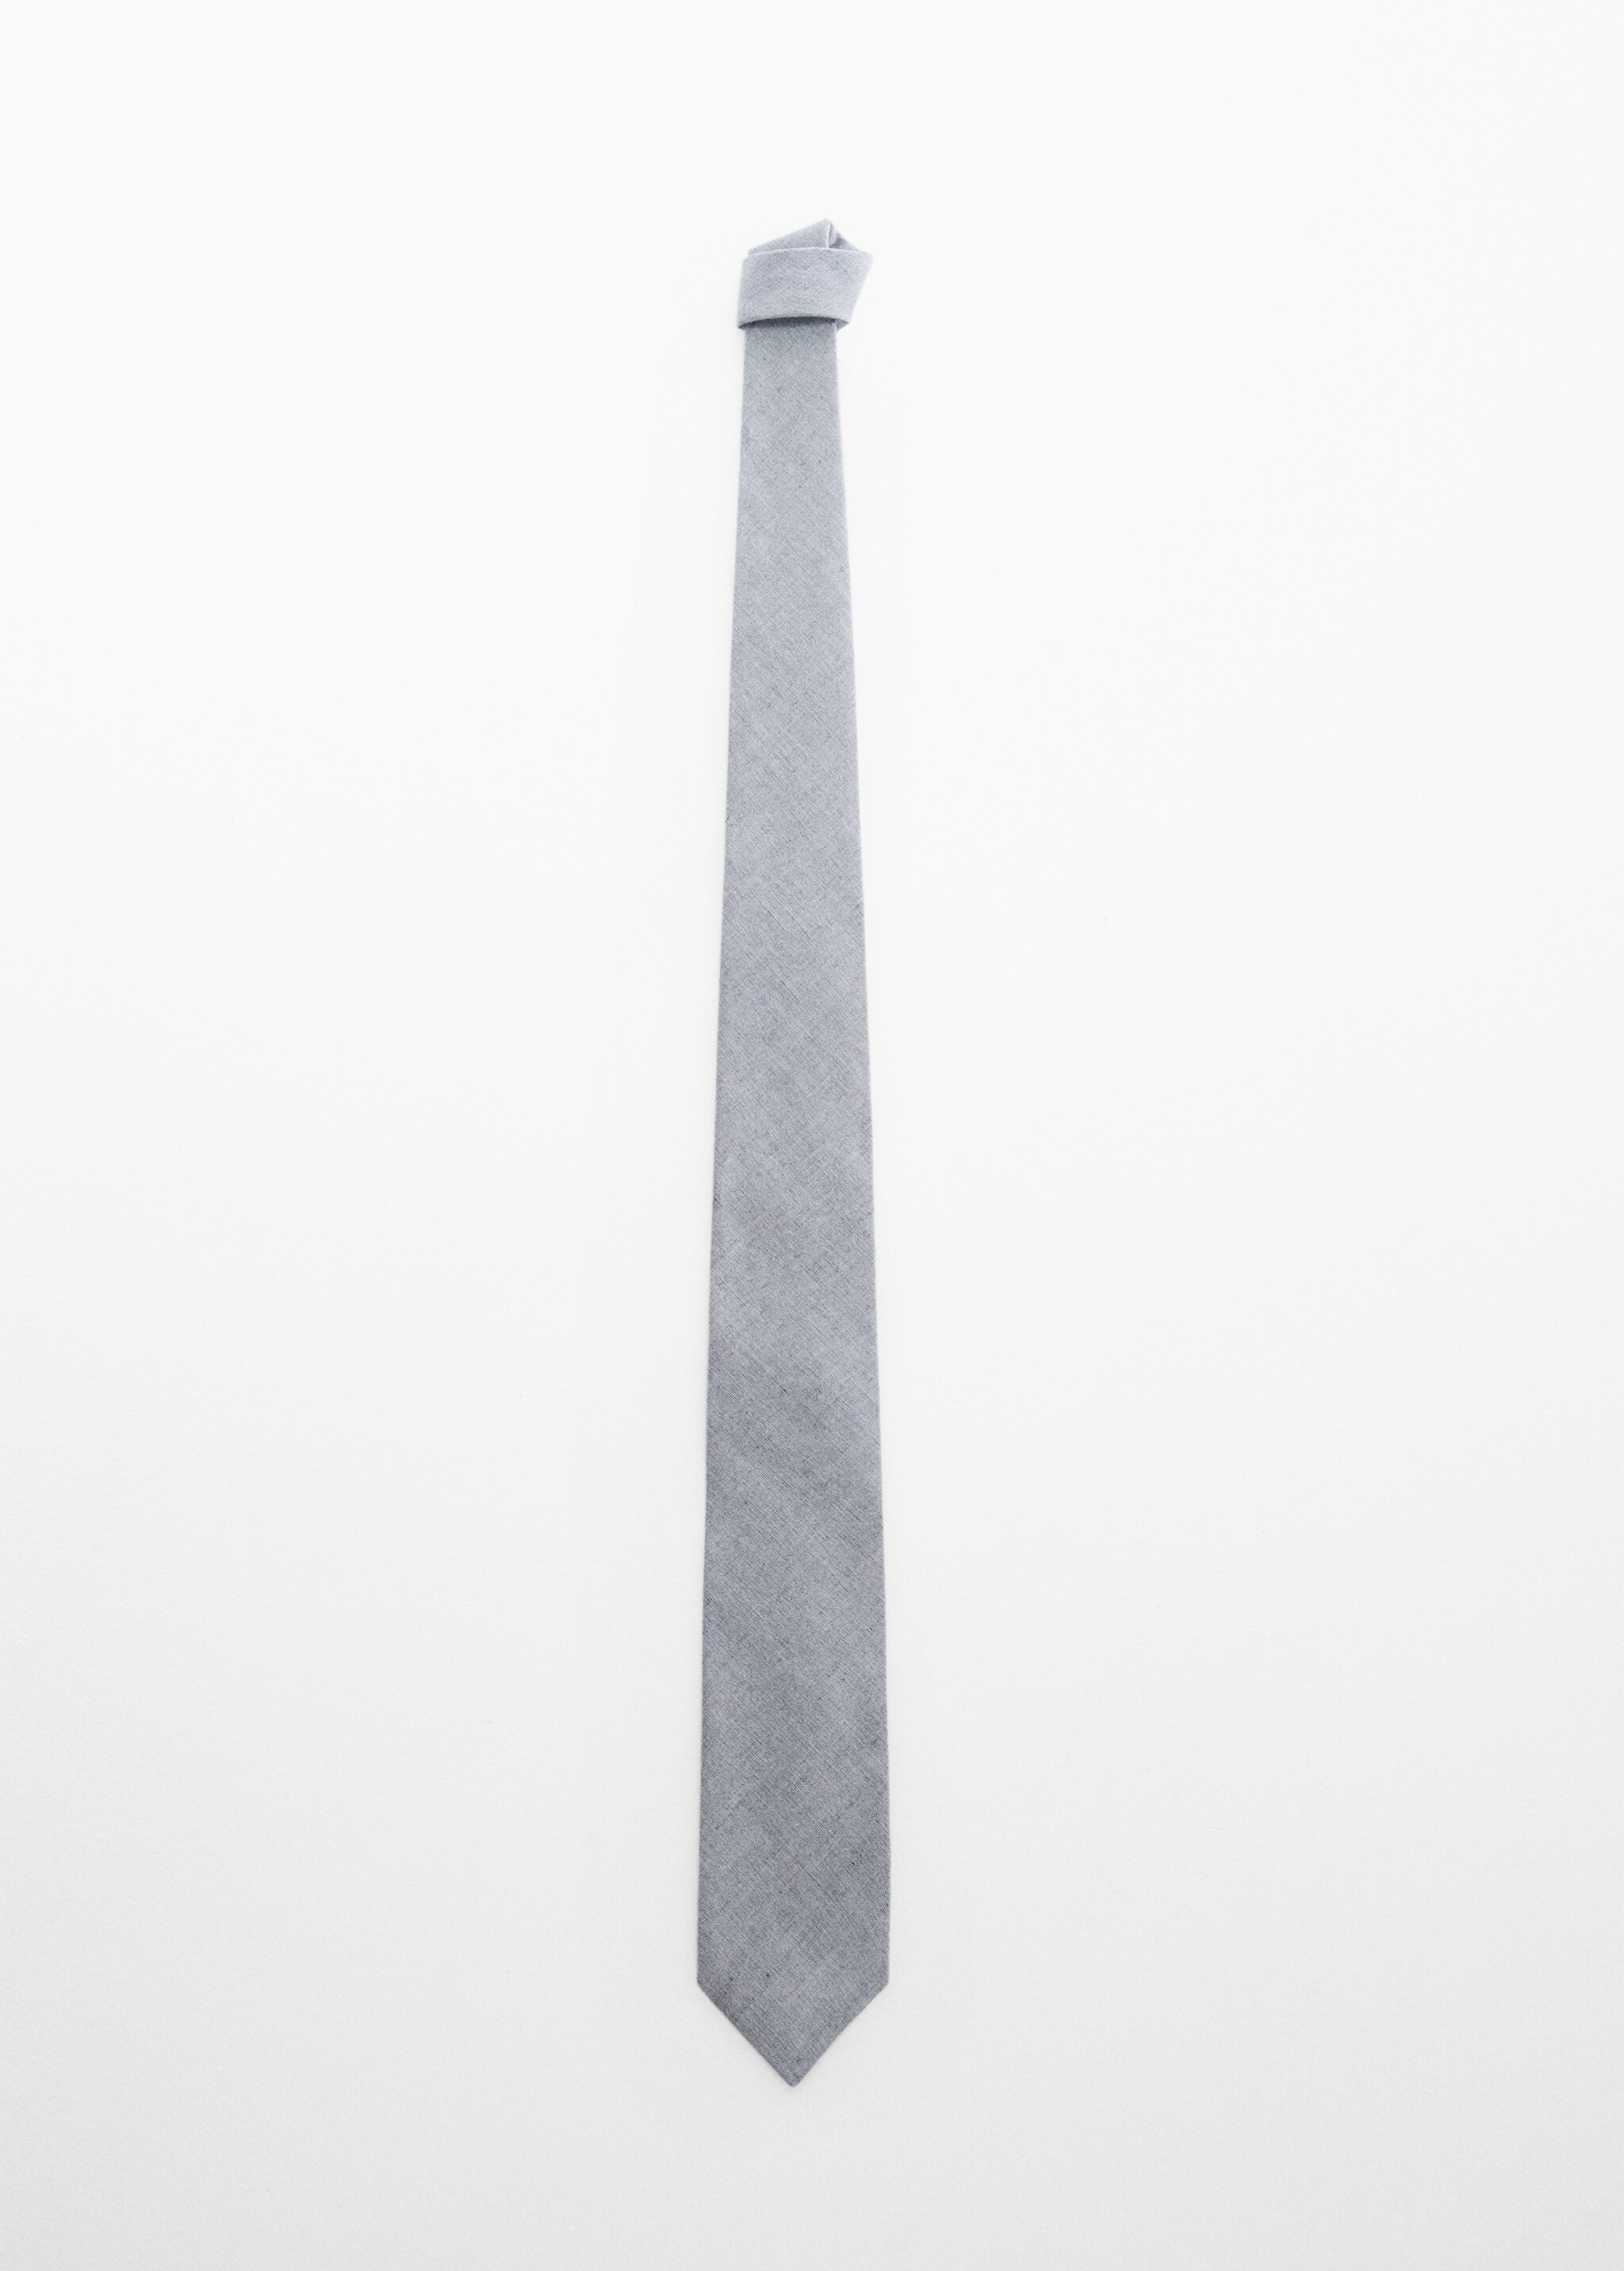 Crease-resistant linen tie - Article without model